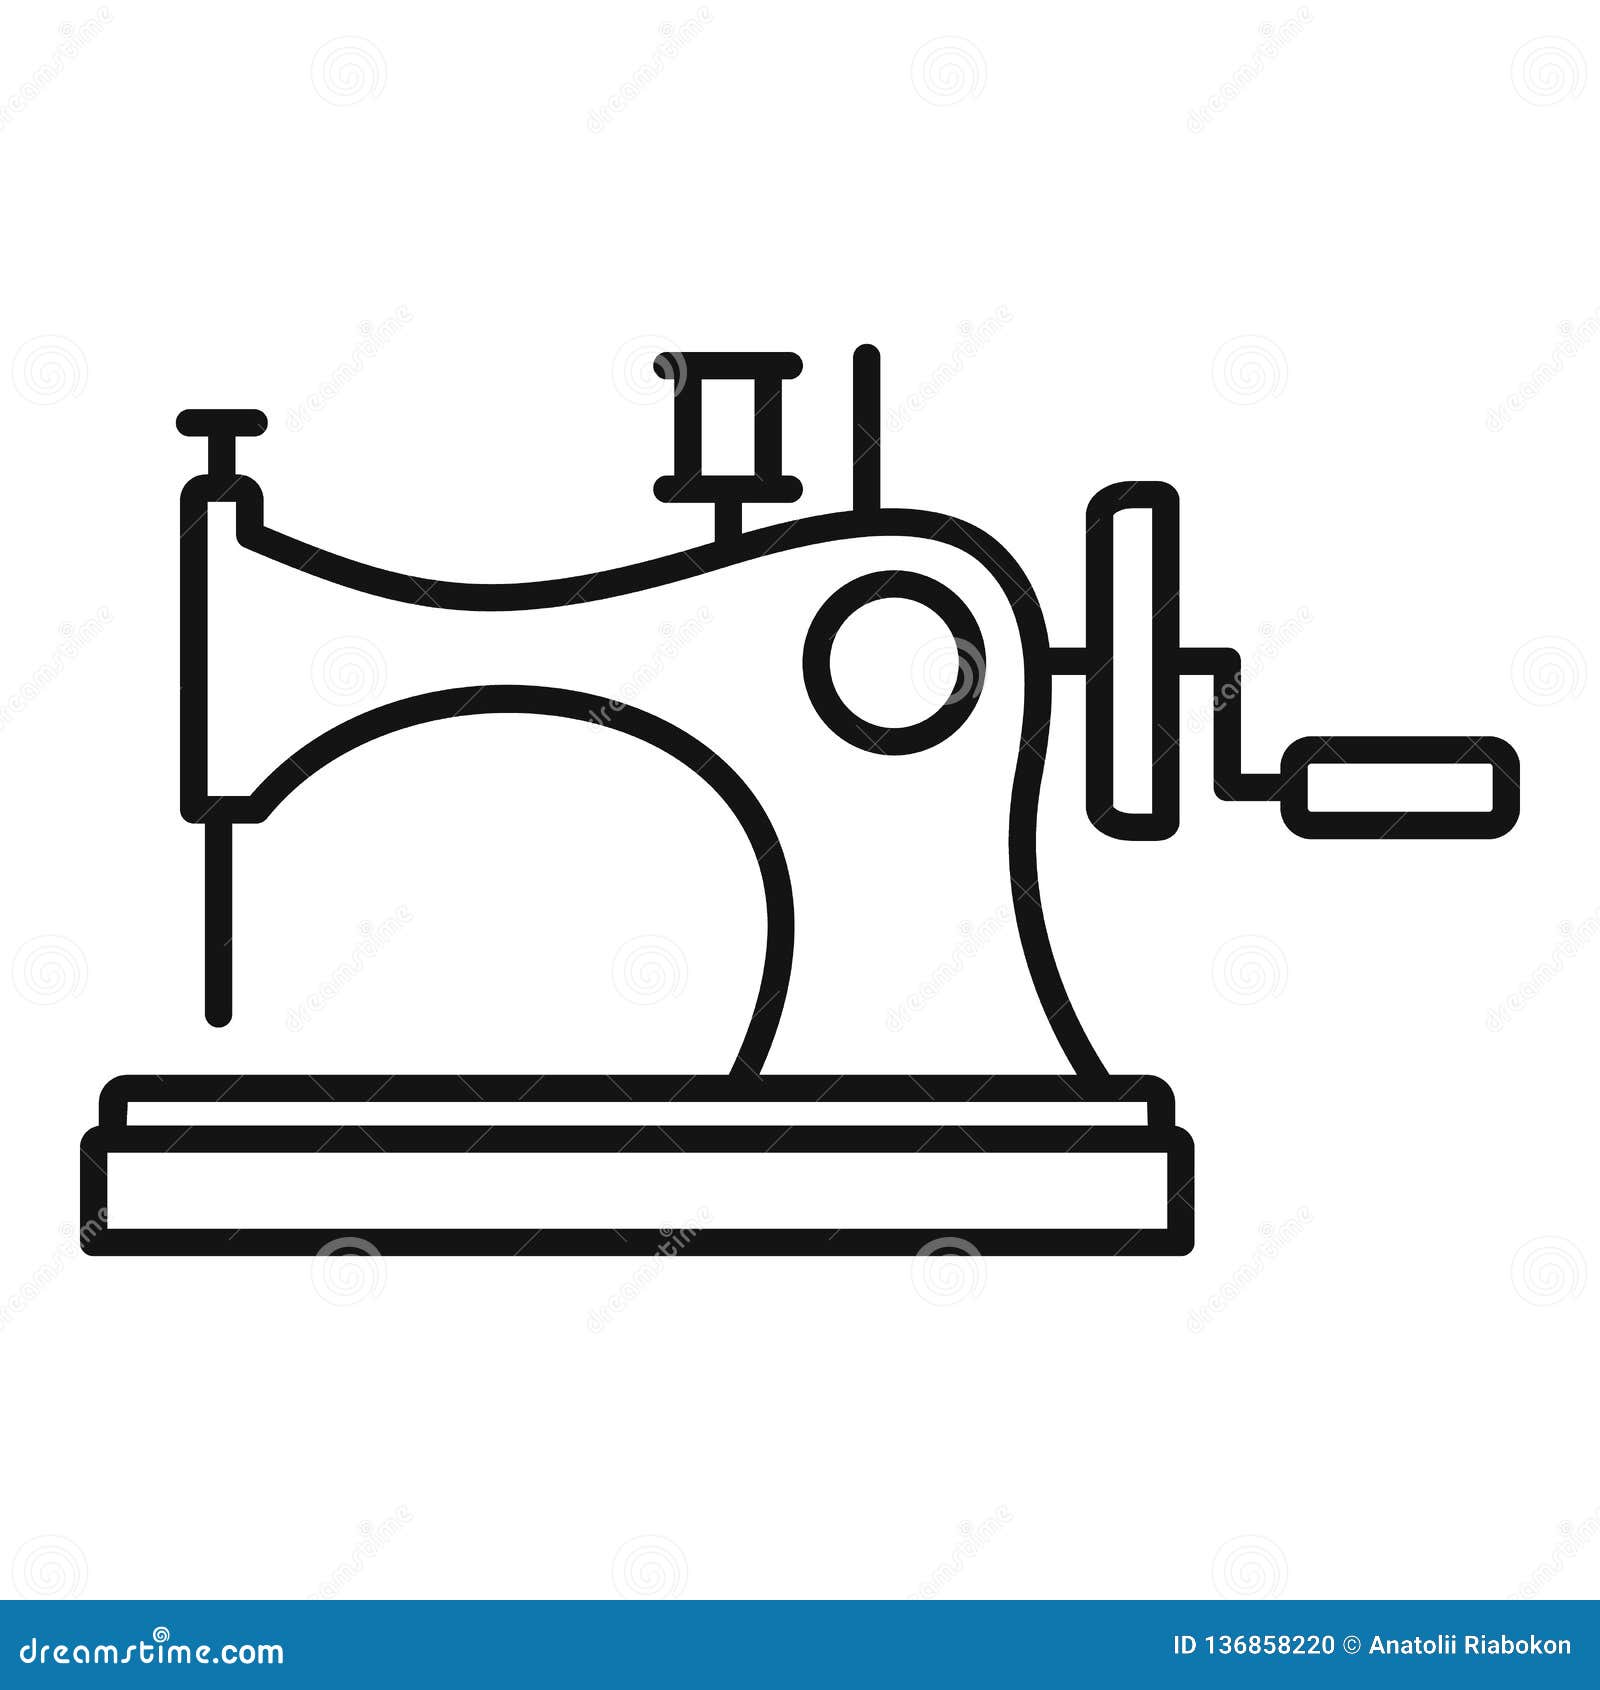 Download Vintage Sew Machine Icon, Outline Style Stock Vector - Illustration of line, fashion: 136858220